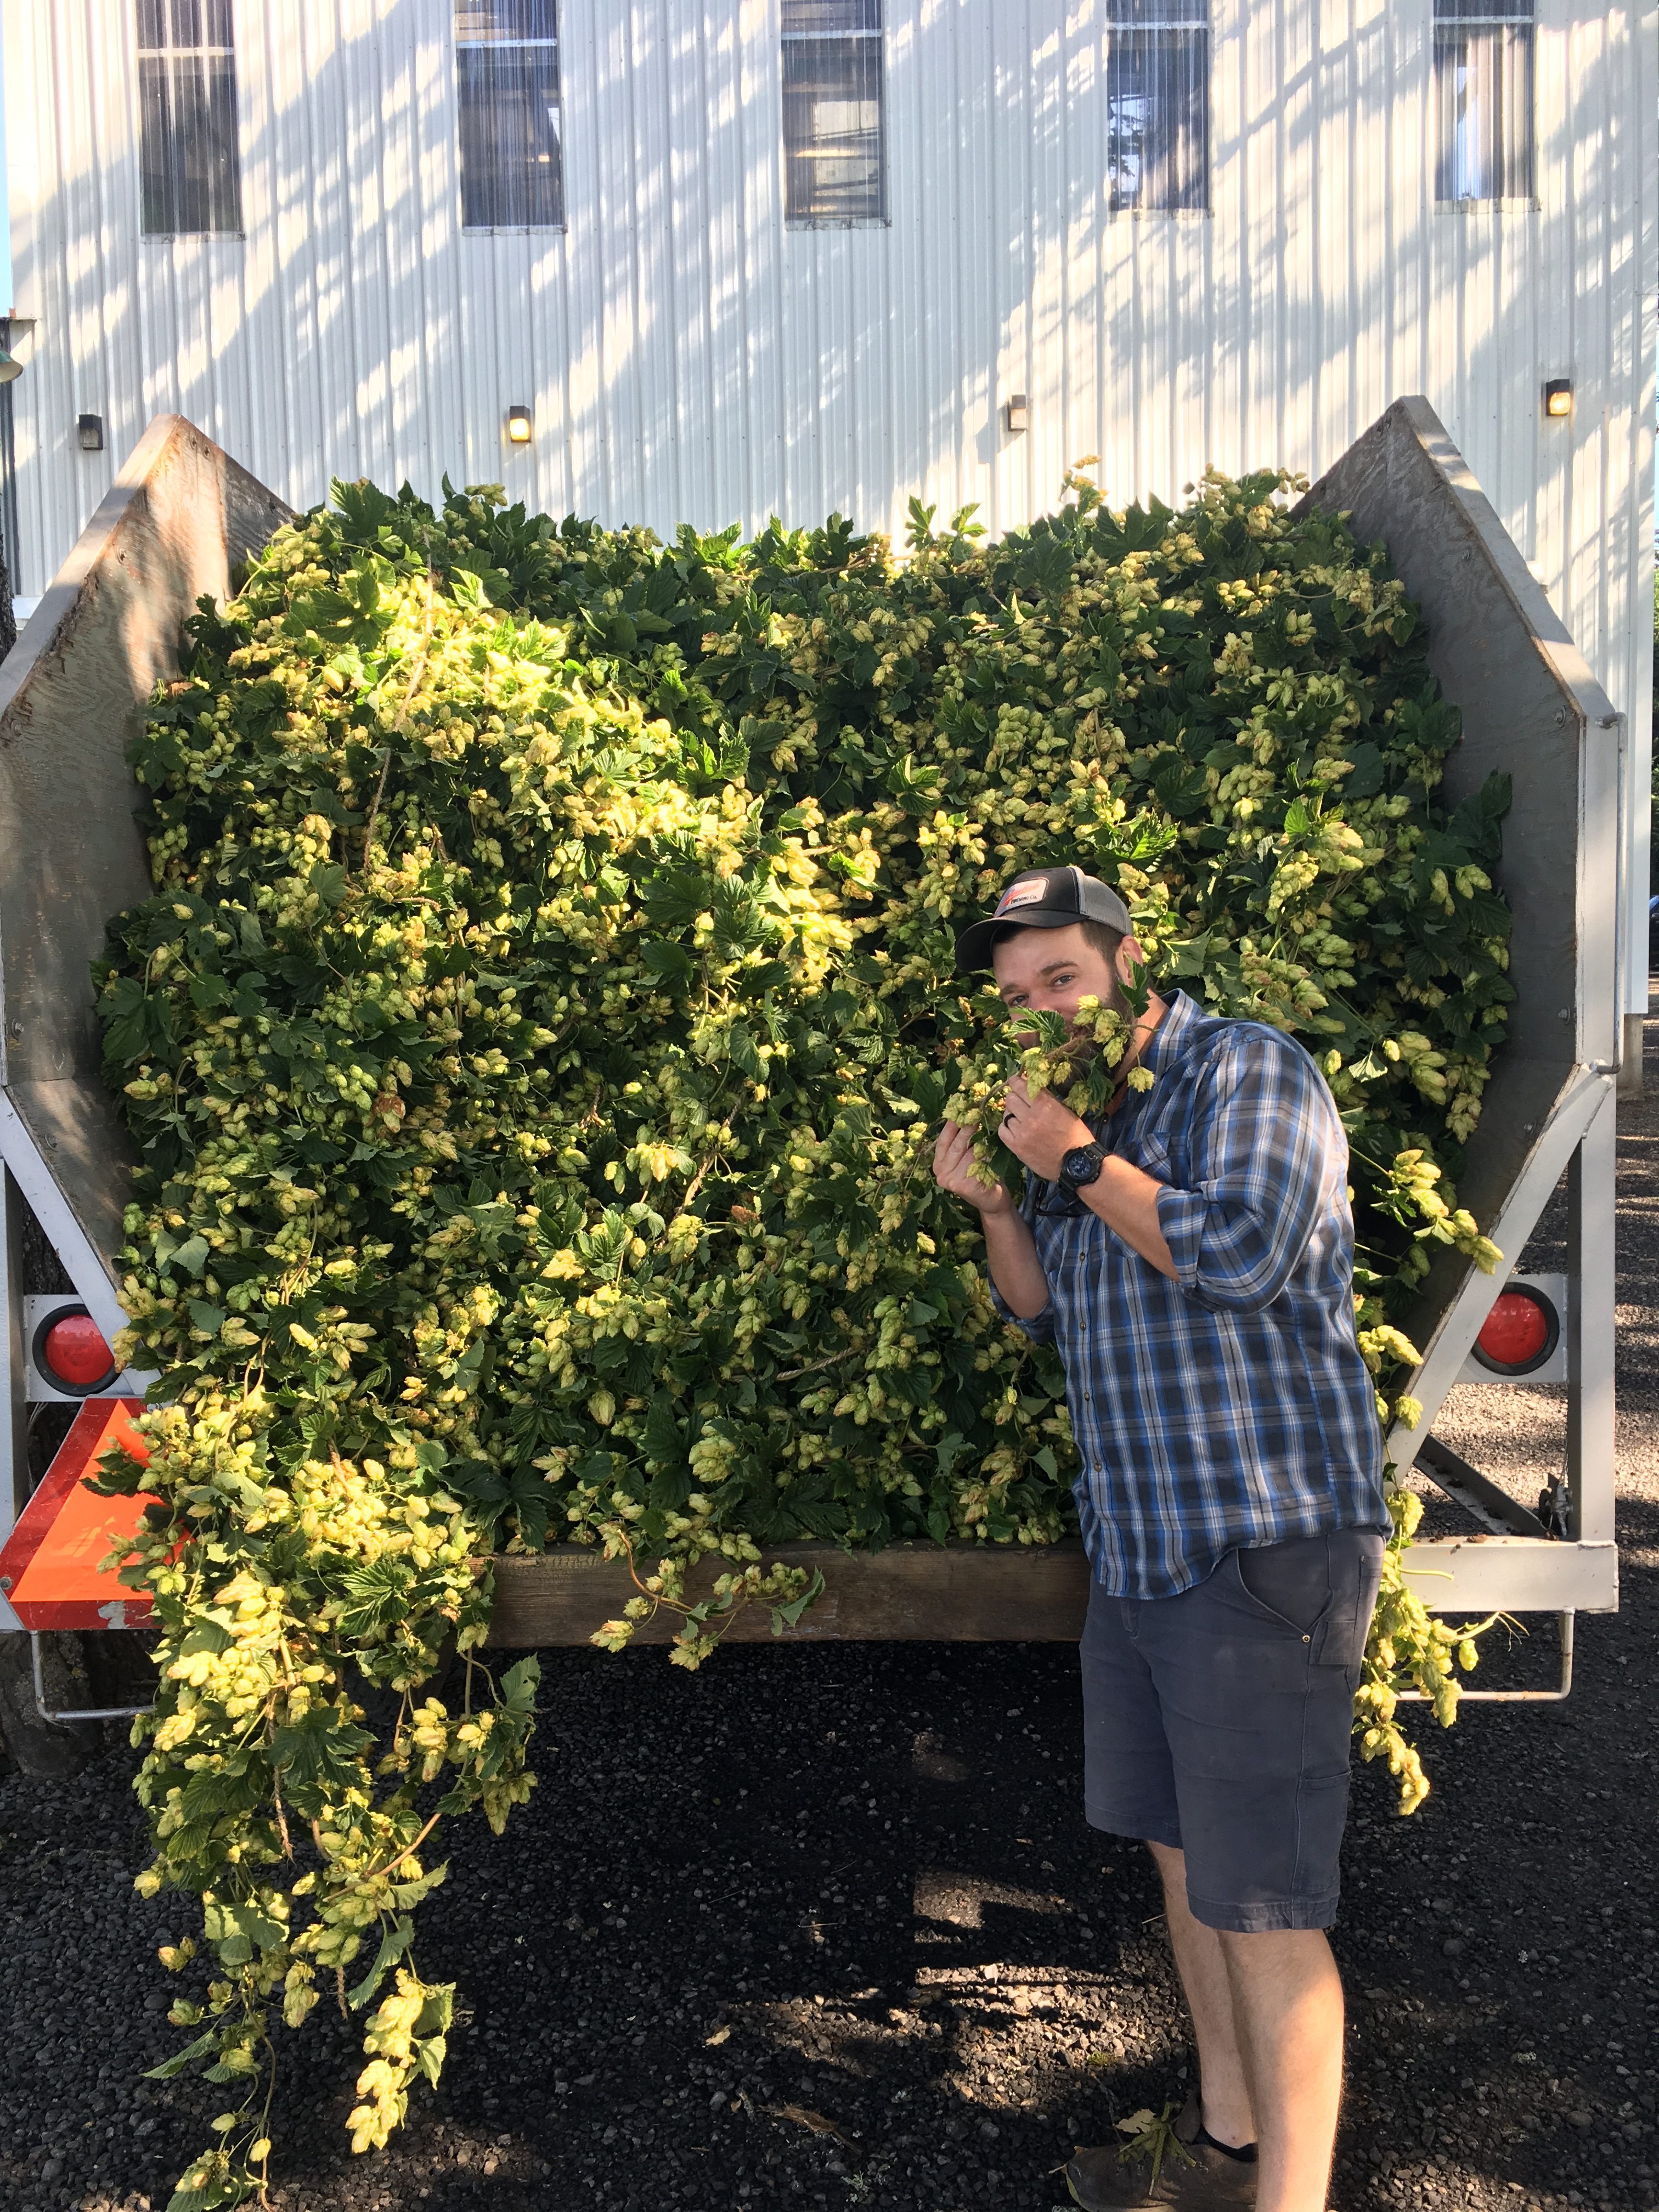 Sam Carroll at Goschie Farms with freshly harvested hops. (image courtesy of Occidental Brewing)